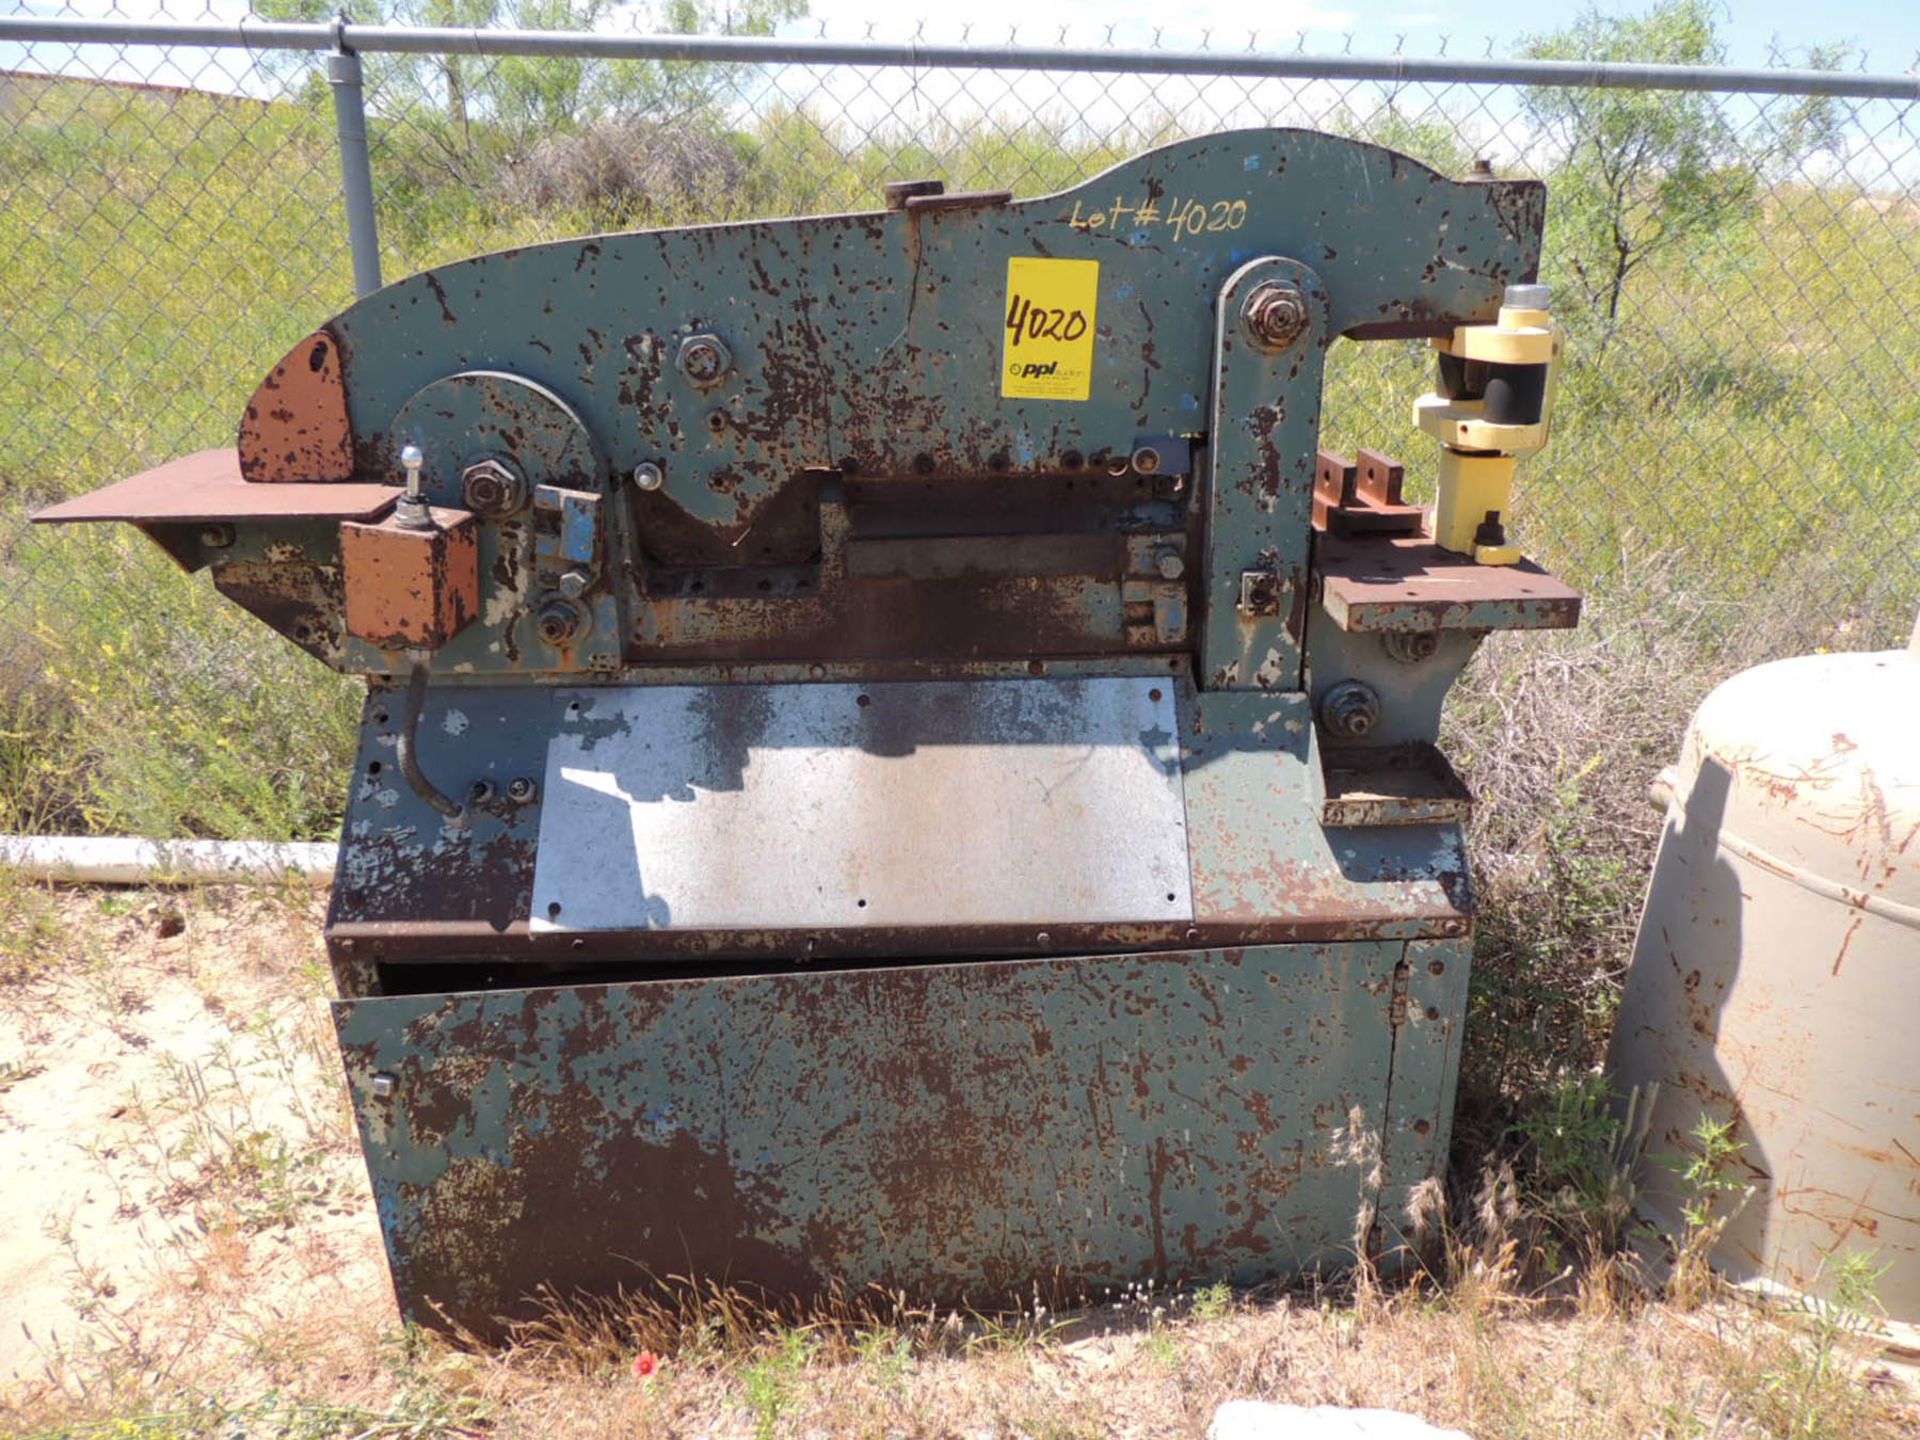 PIRANHA IRONWORKER (CONDITION UNKNOWN), AIR TANK - NO COMPRESSOR OR MOTOR (CANADIAN TX)